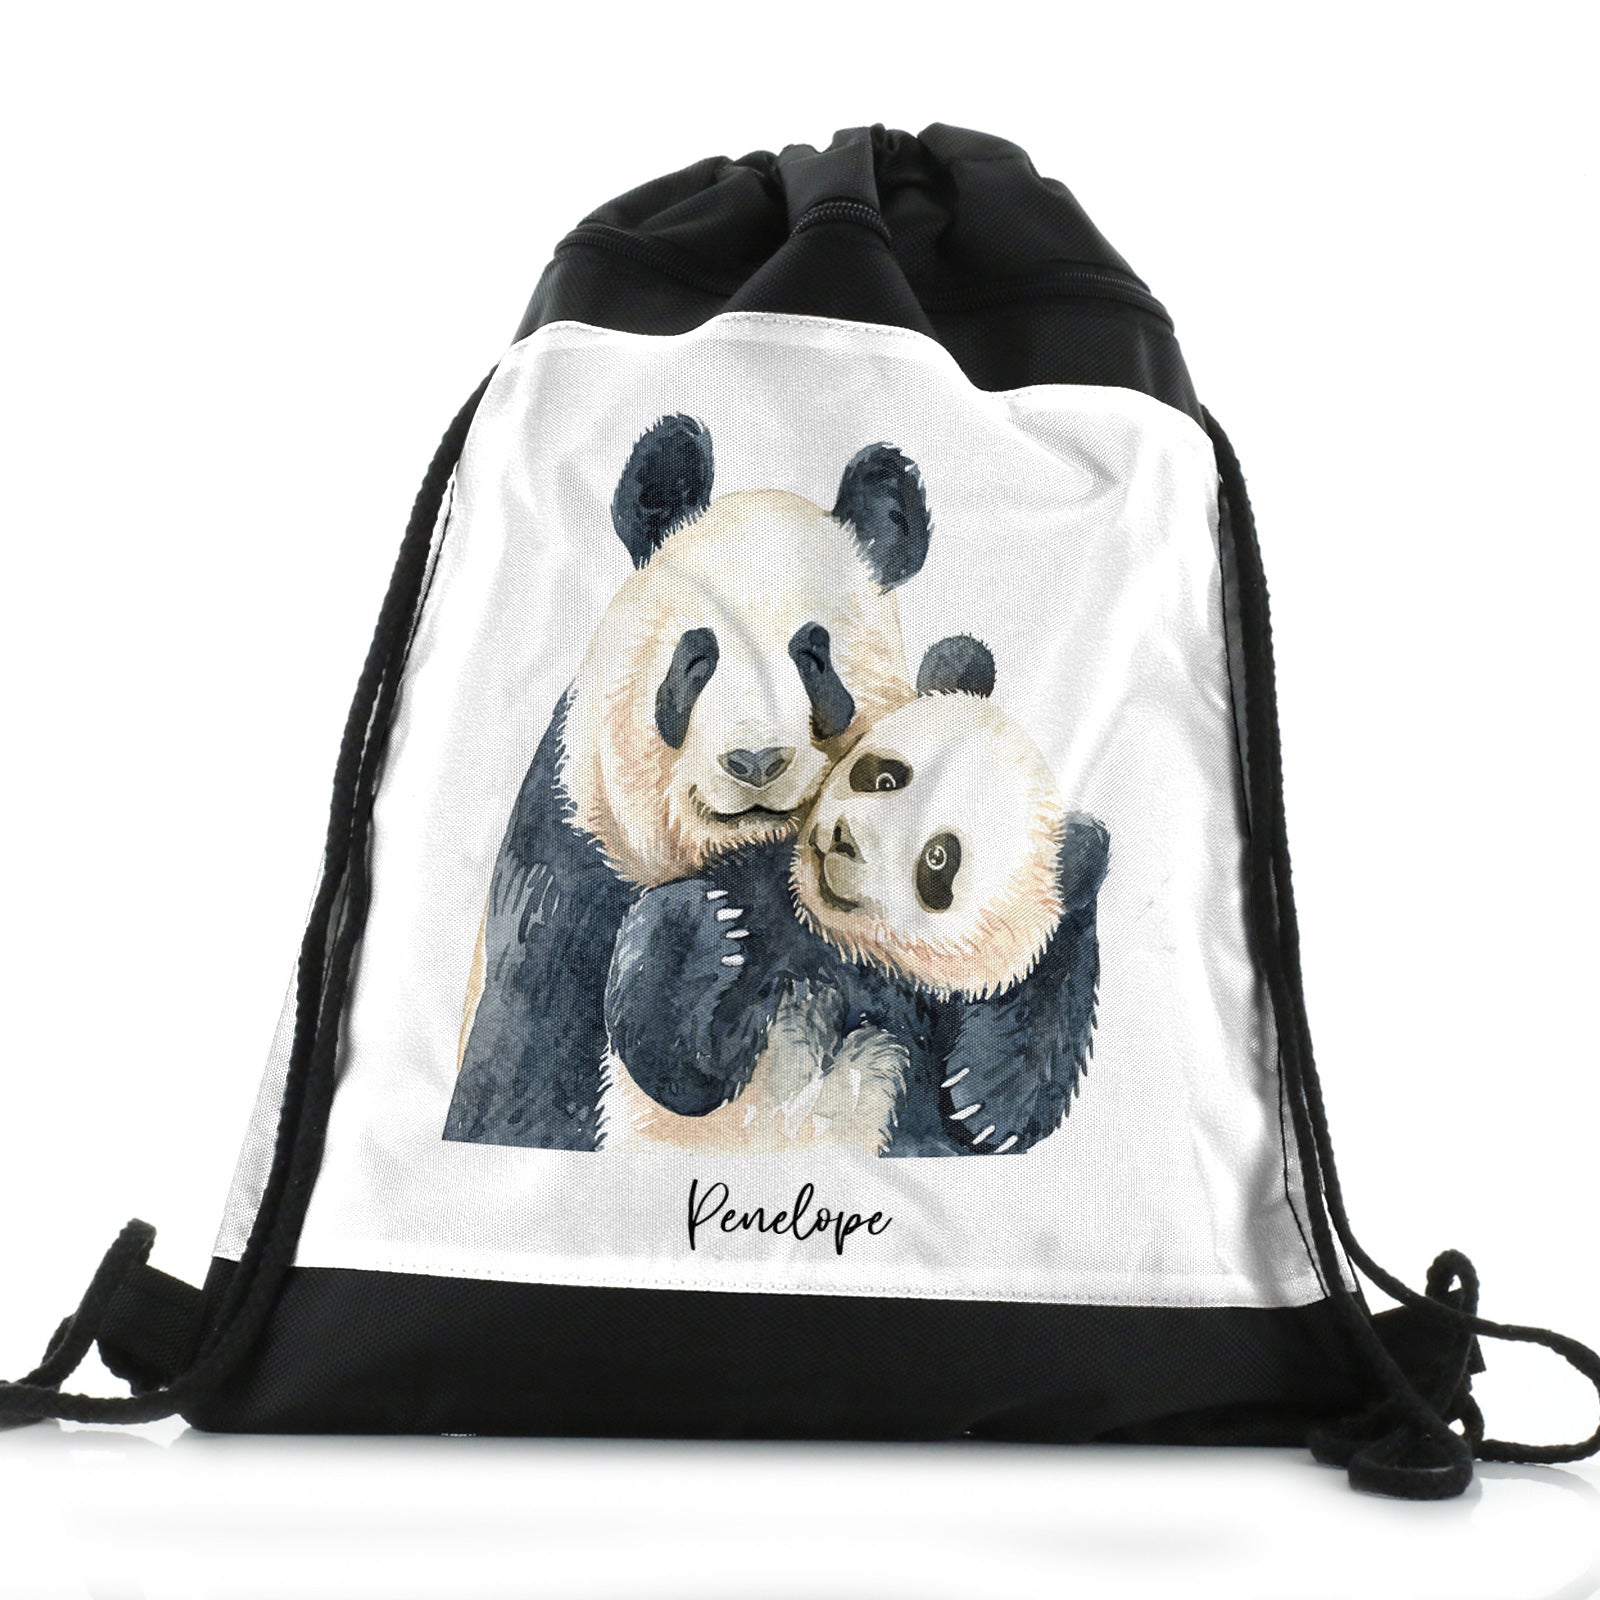 Personalised Drawstring Backpack with Welcoming Text and Embracing Mum and Baby Pandas